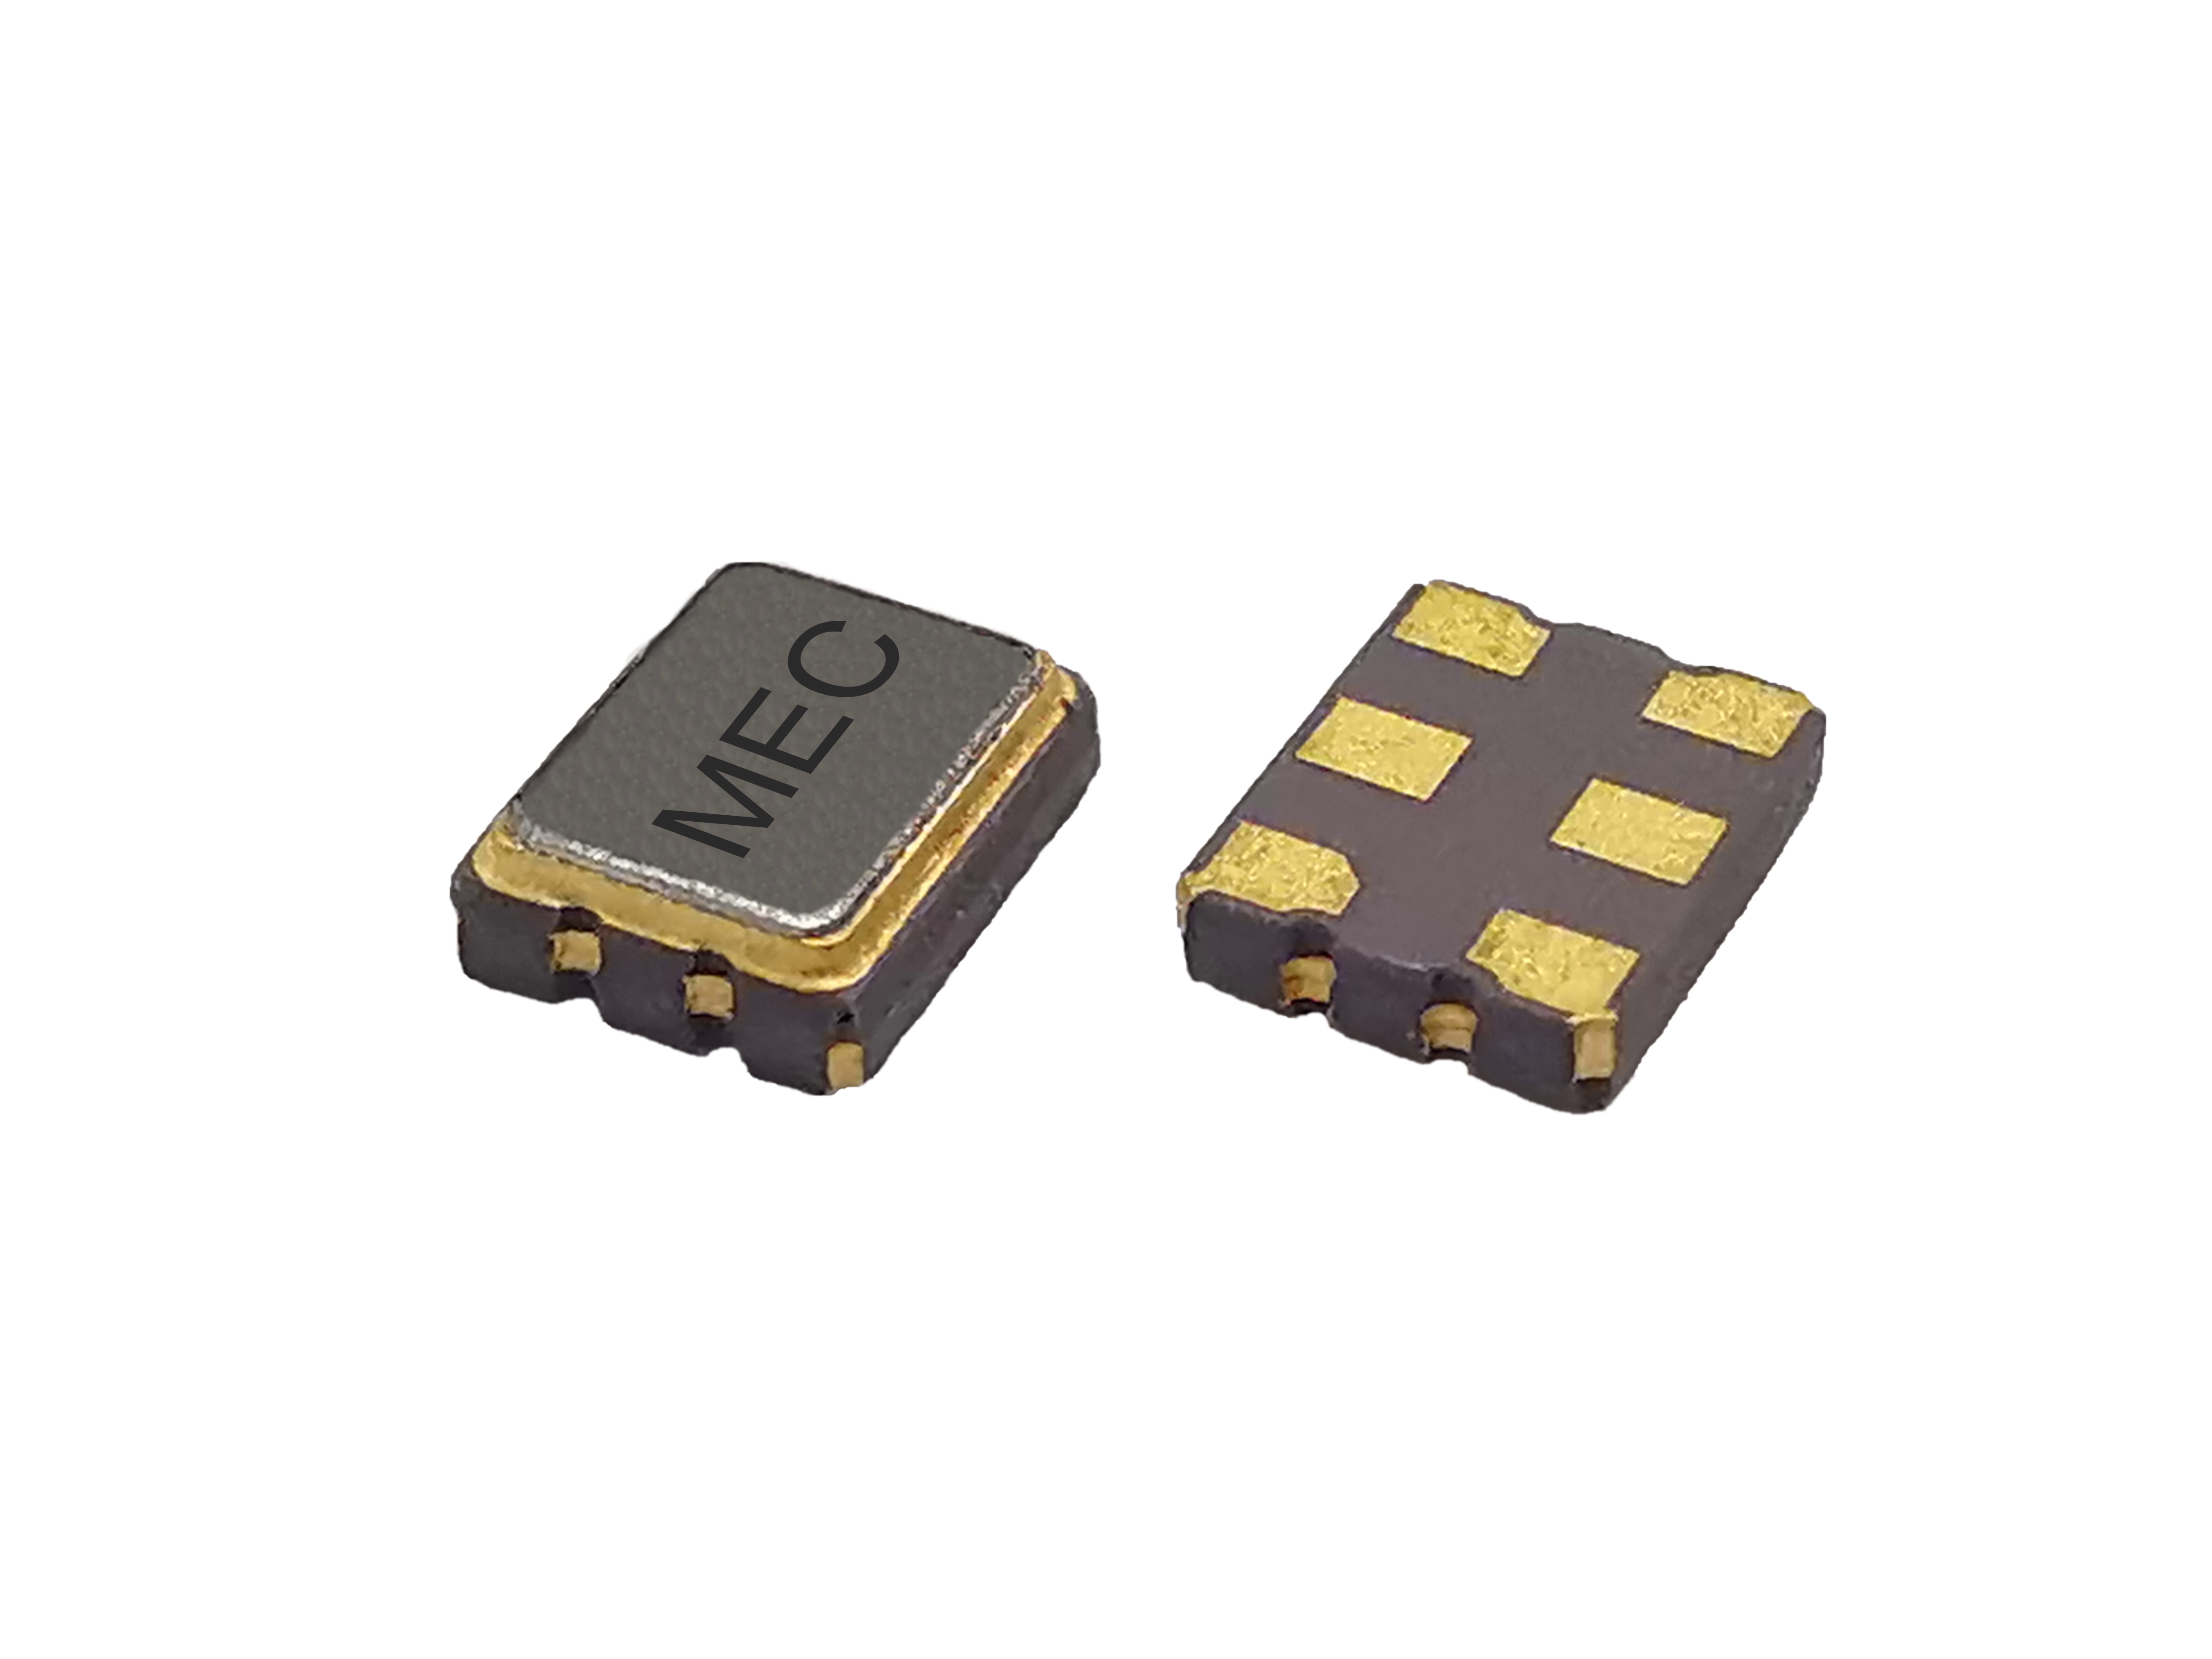 HCDQF326 3225 2.5V Quick-Turn Programmable Frequency Swithable Differential LVDS SMD Crystal Oscillator